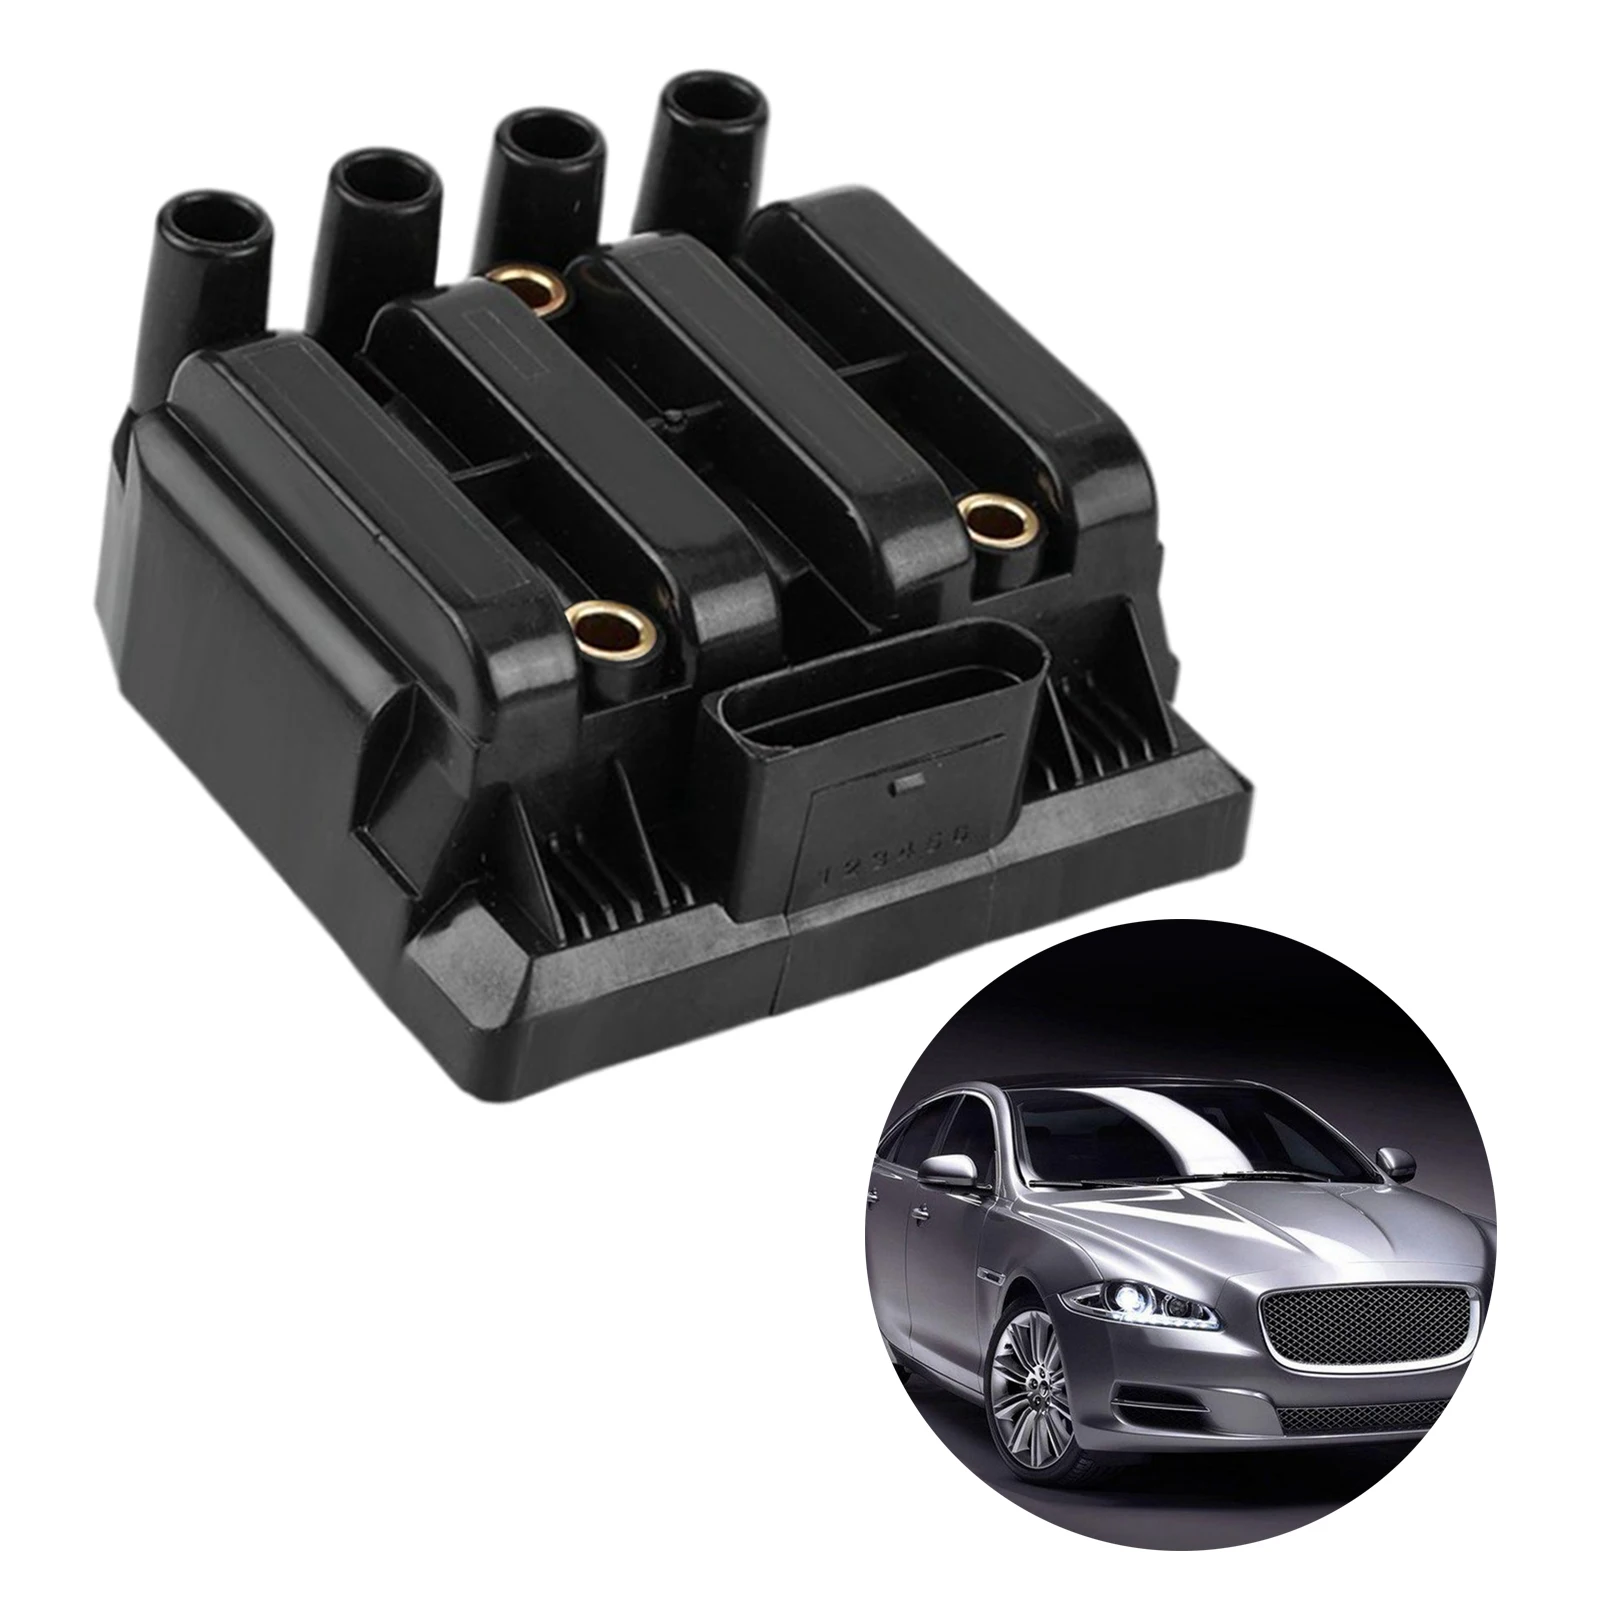 Portable Spare Car Ignition Coil UF484 For VW Jetta Beetle L4 2.0L C1393 2004 2005 Car Accessories